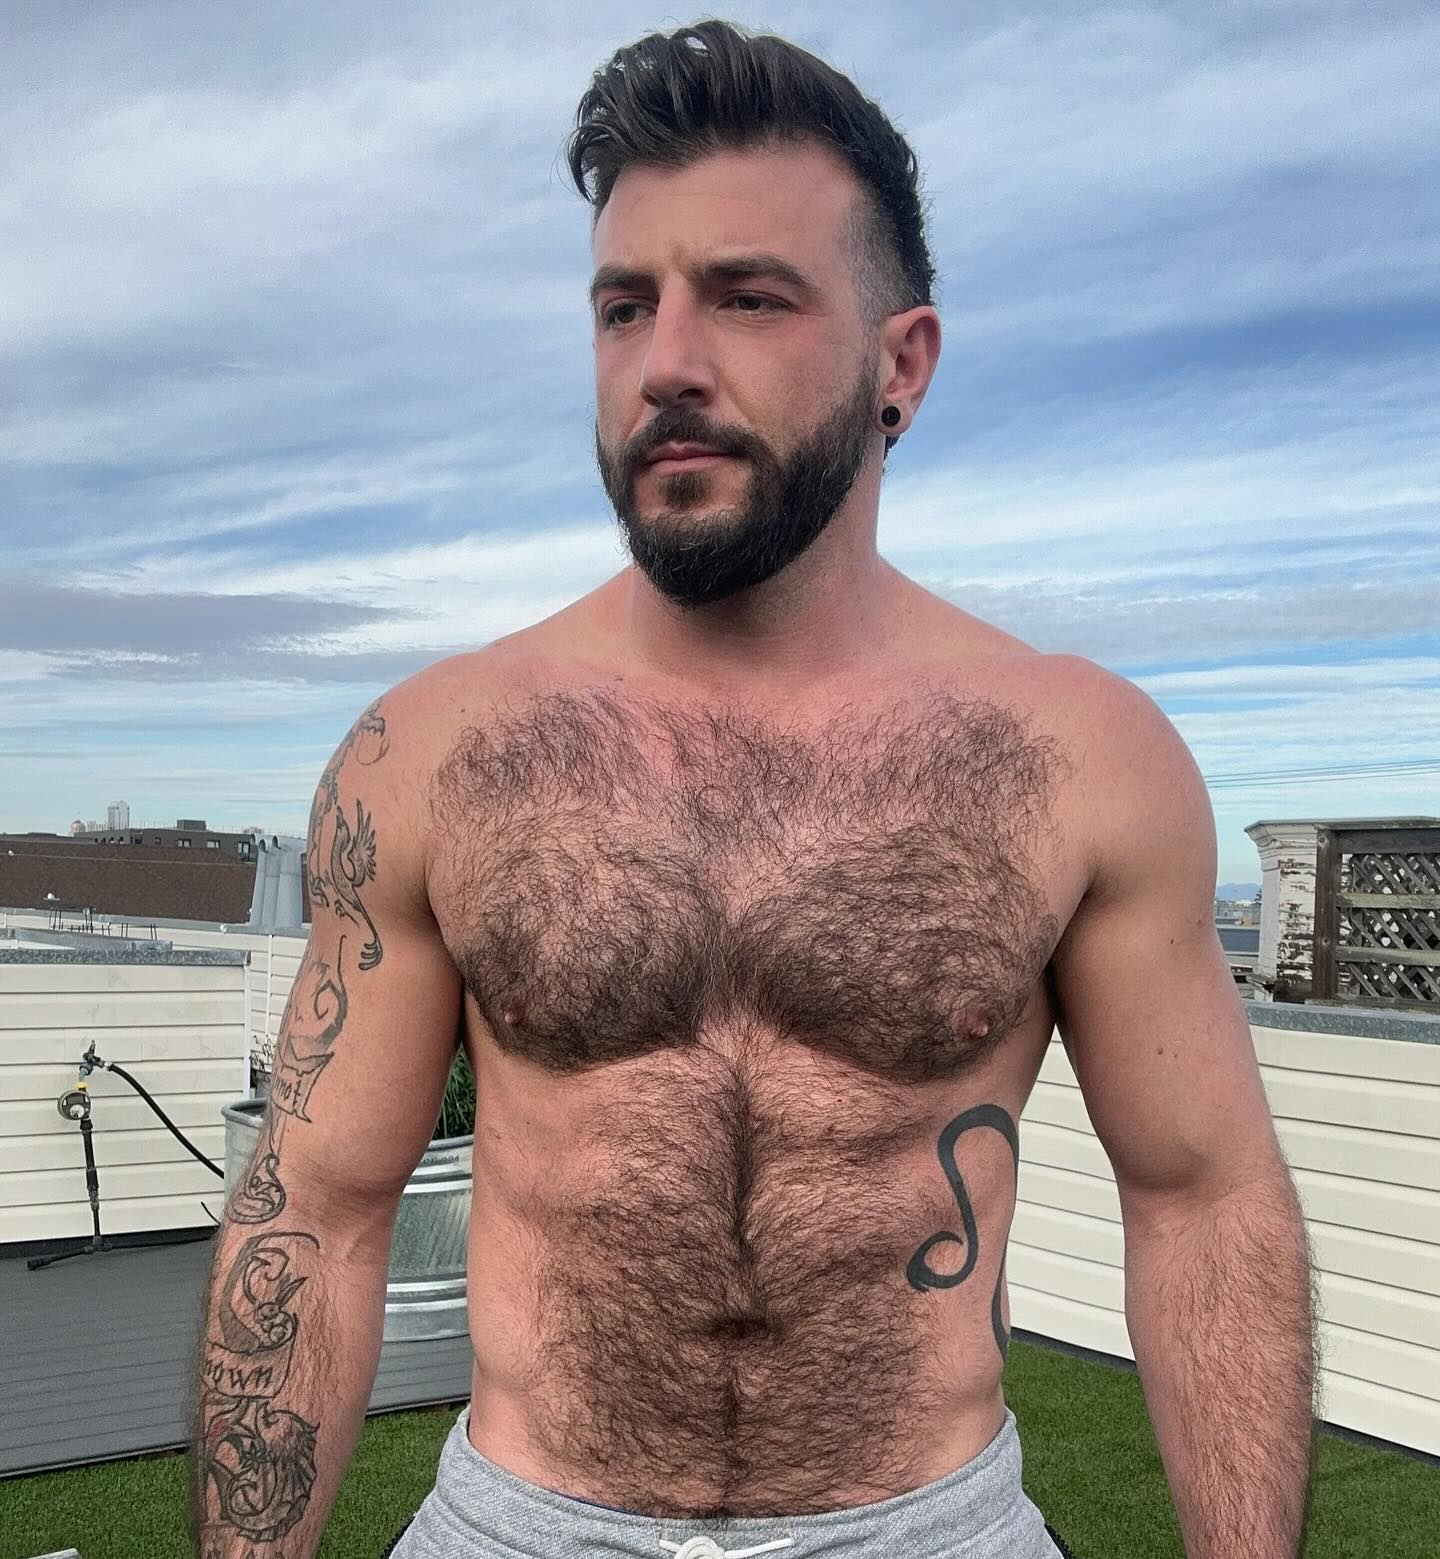 Little photoshoot on my new roof deck. The clouds were calling for it ☁️ 

.

.

.

.

.

.

#hikinggays #outdoorsygay #traillife #hairygaymen #hairygays #hairymuscles #hairymusclegay #hairysexy #sexyhairy #waterfall #musclegays #muscledad #muscledaddy💪 #musclesandtattoos